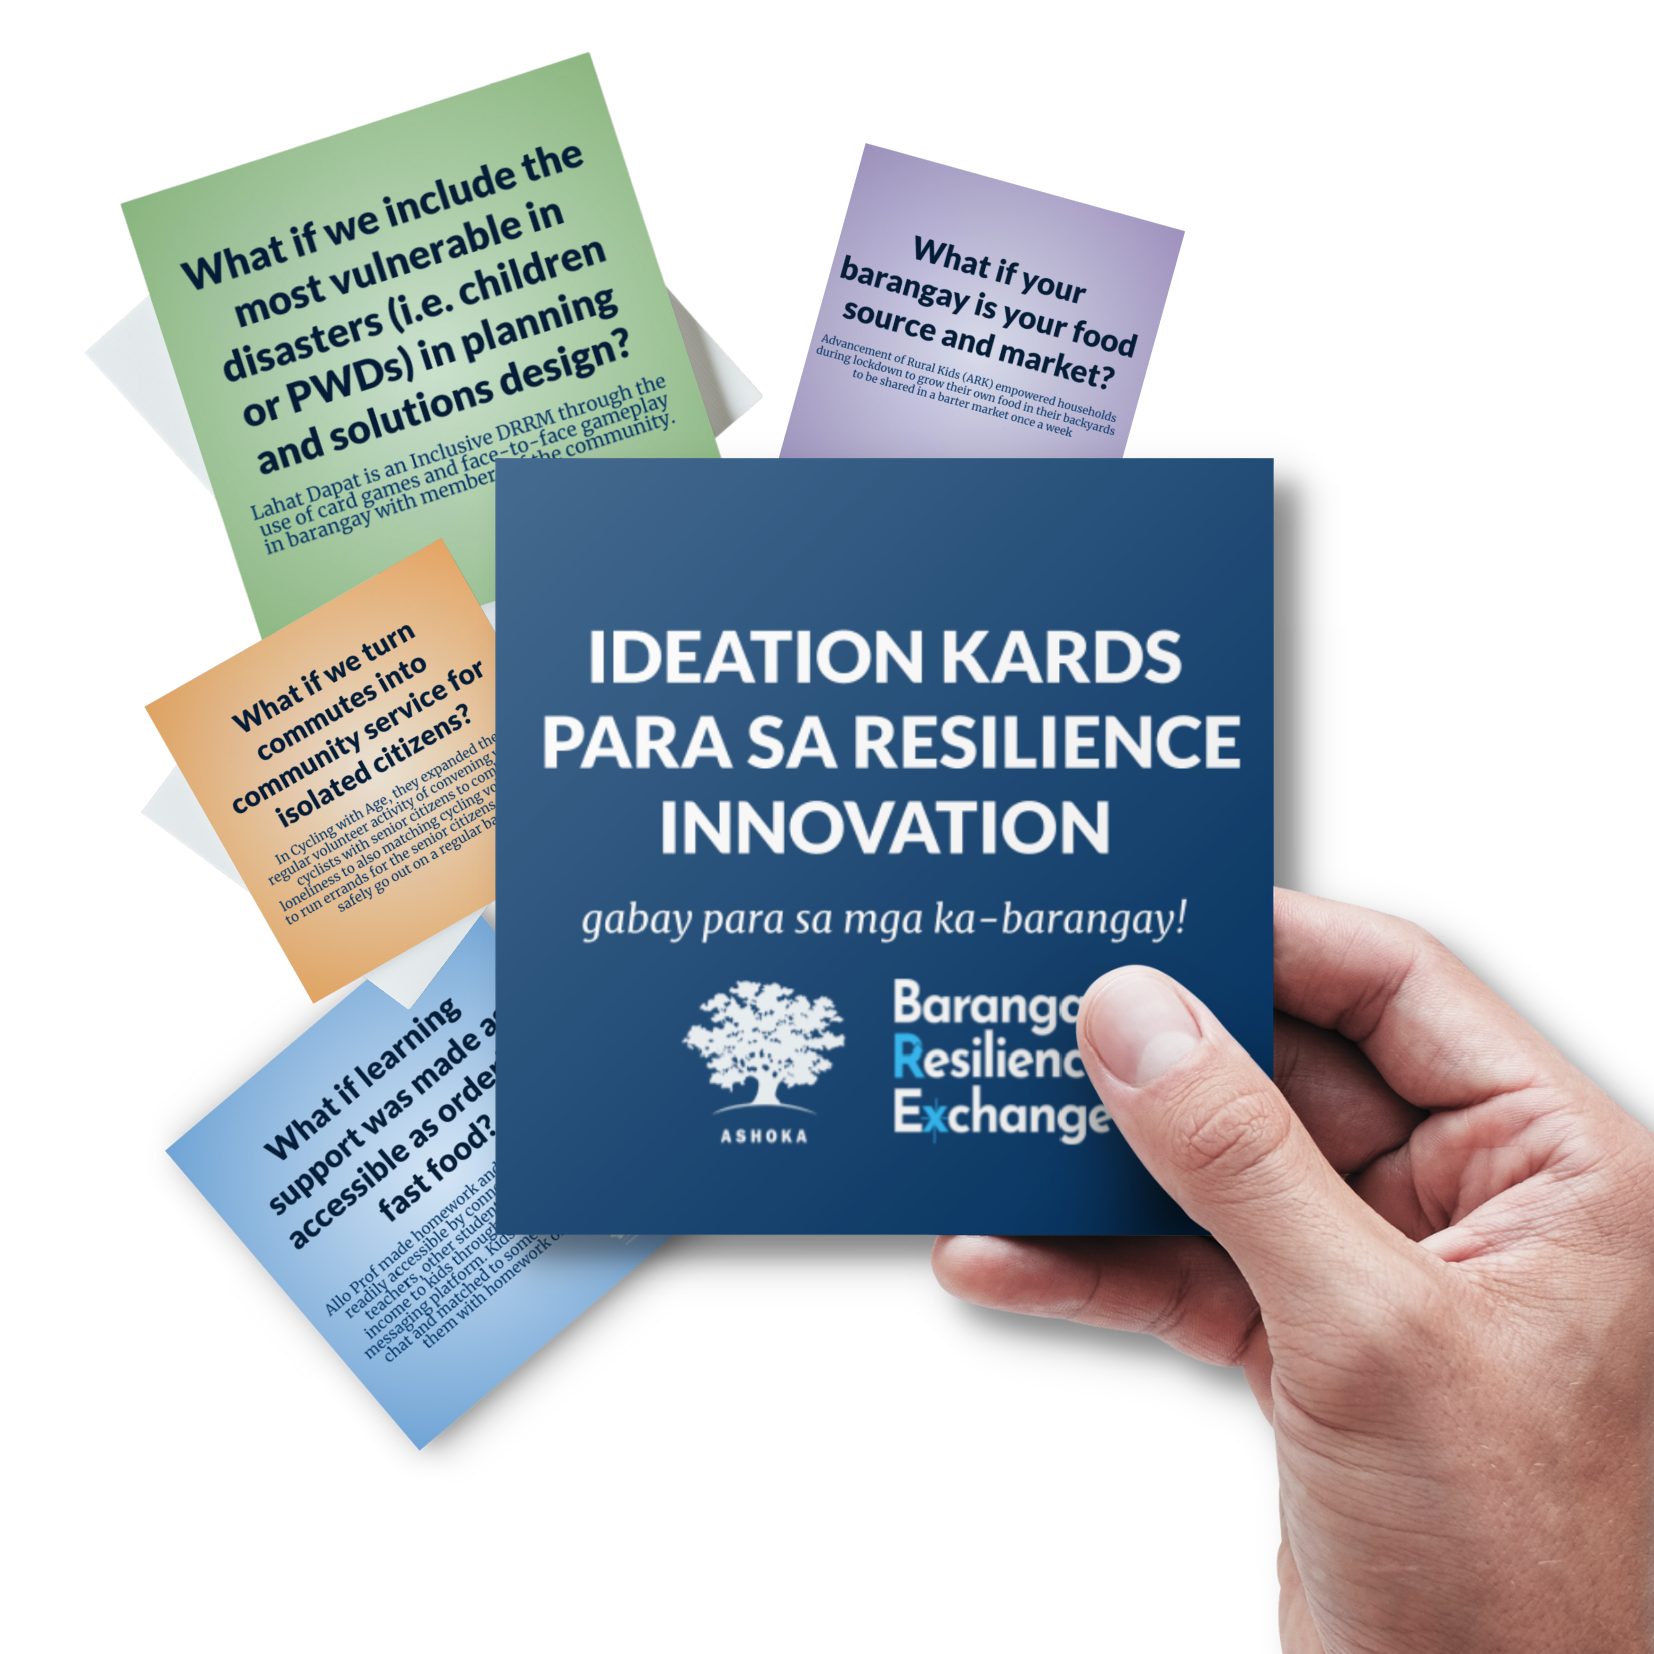 Ideation cards with What if statements to innovate resilience